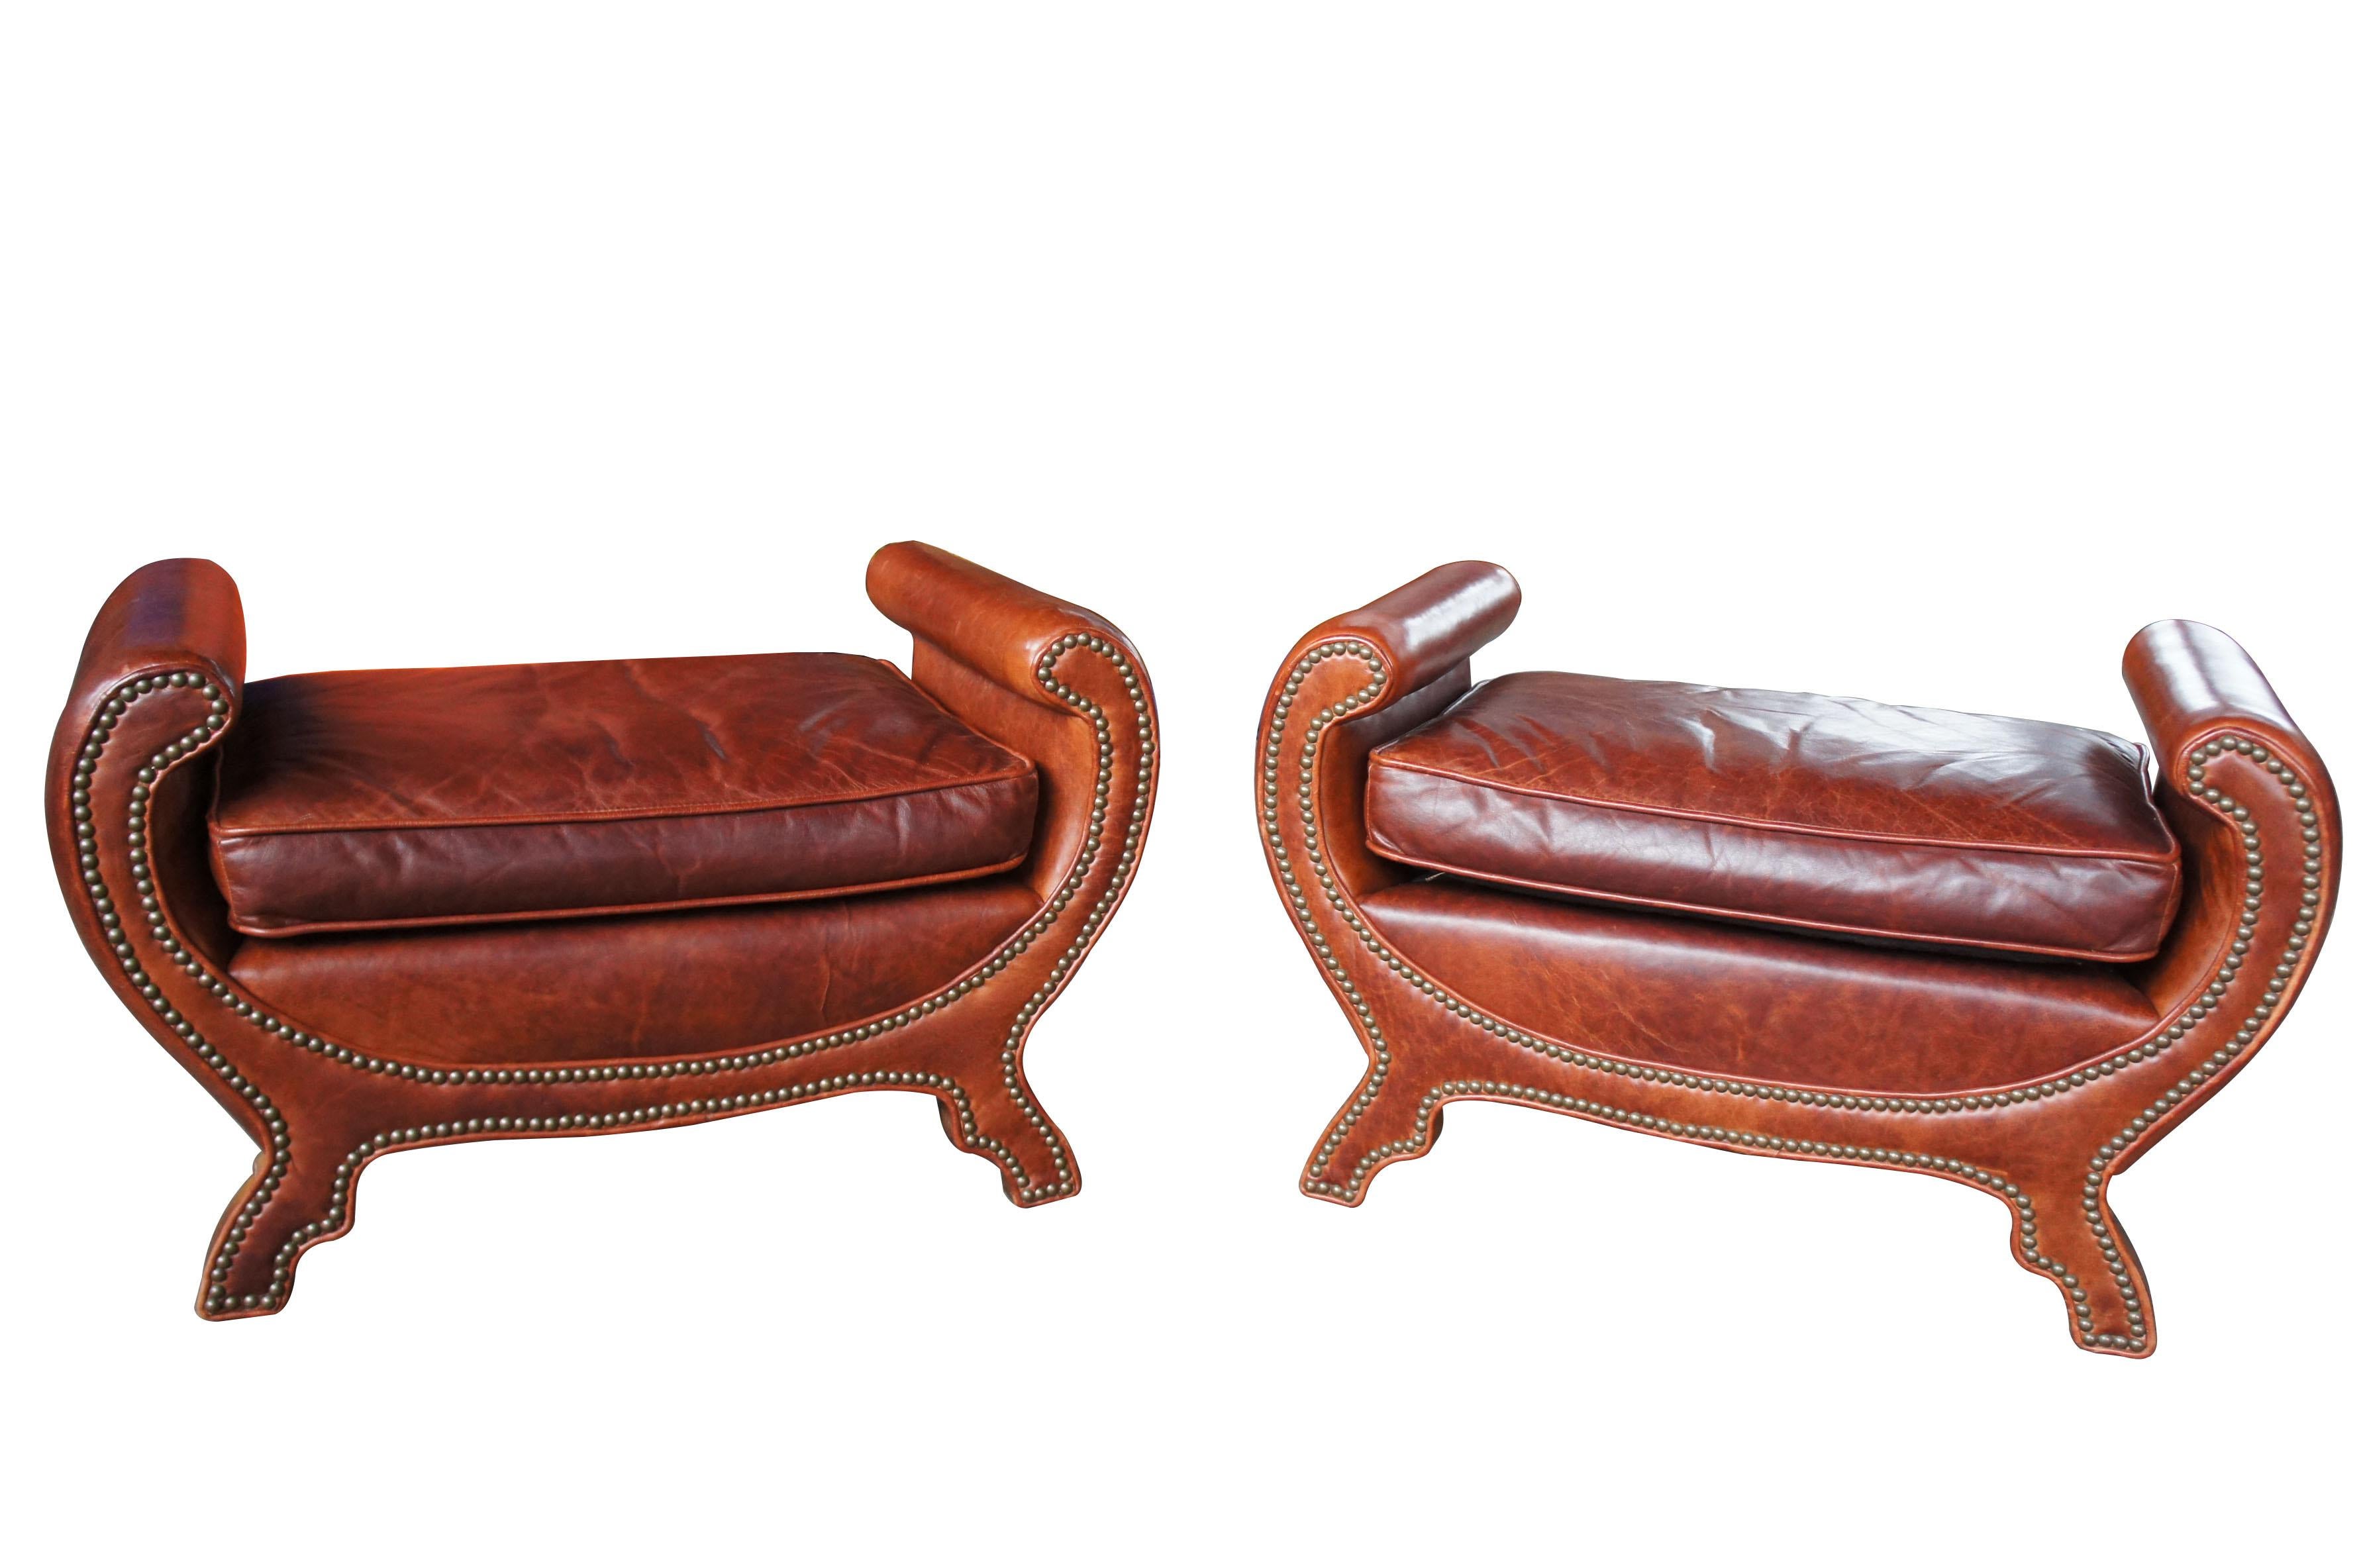 2 century Furniture Duke of York leather studded benches ottoman seat LR-38071

Featuring brown leather with nail head trip and scrolled arms.

 